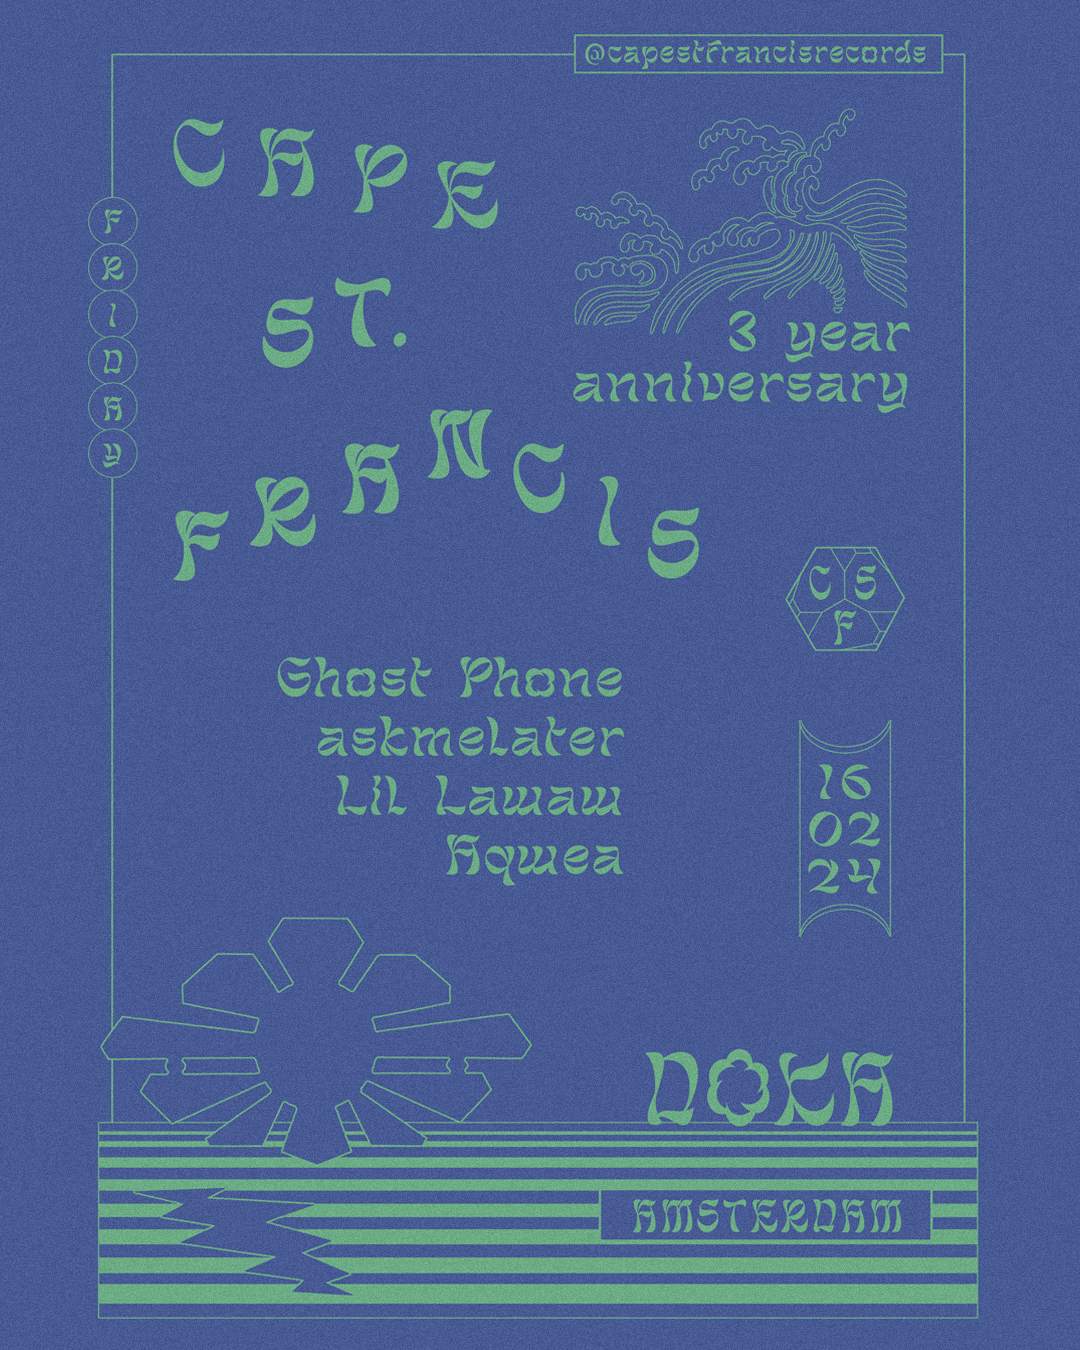 Cape St. Francis 3Y Anniversary with Aqwea, Ghost Phone, askmelater and Lil Lawaw - Página frontal